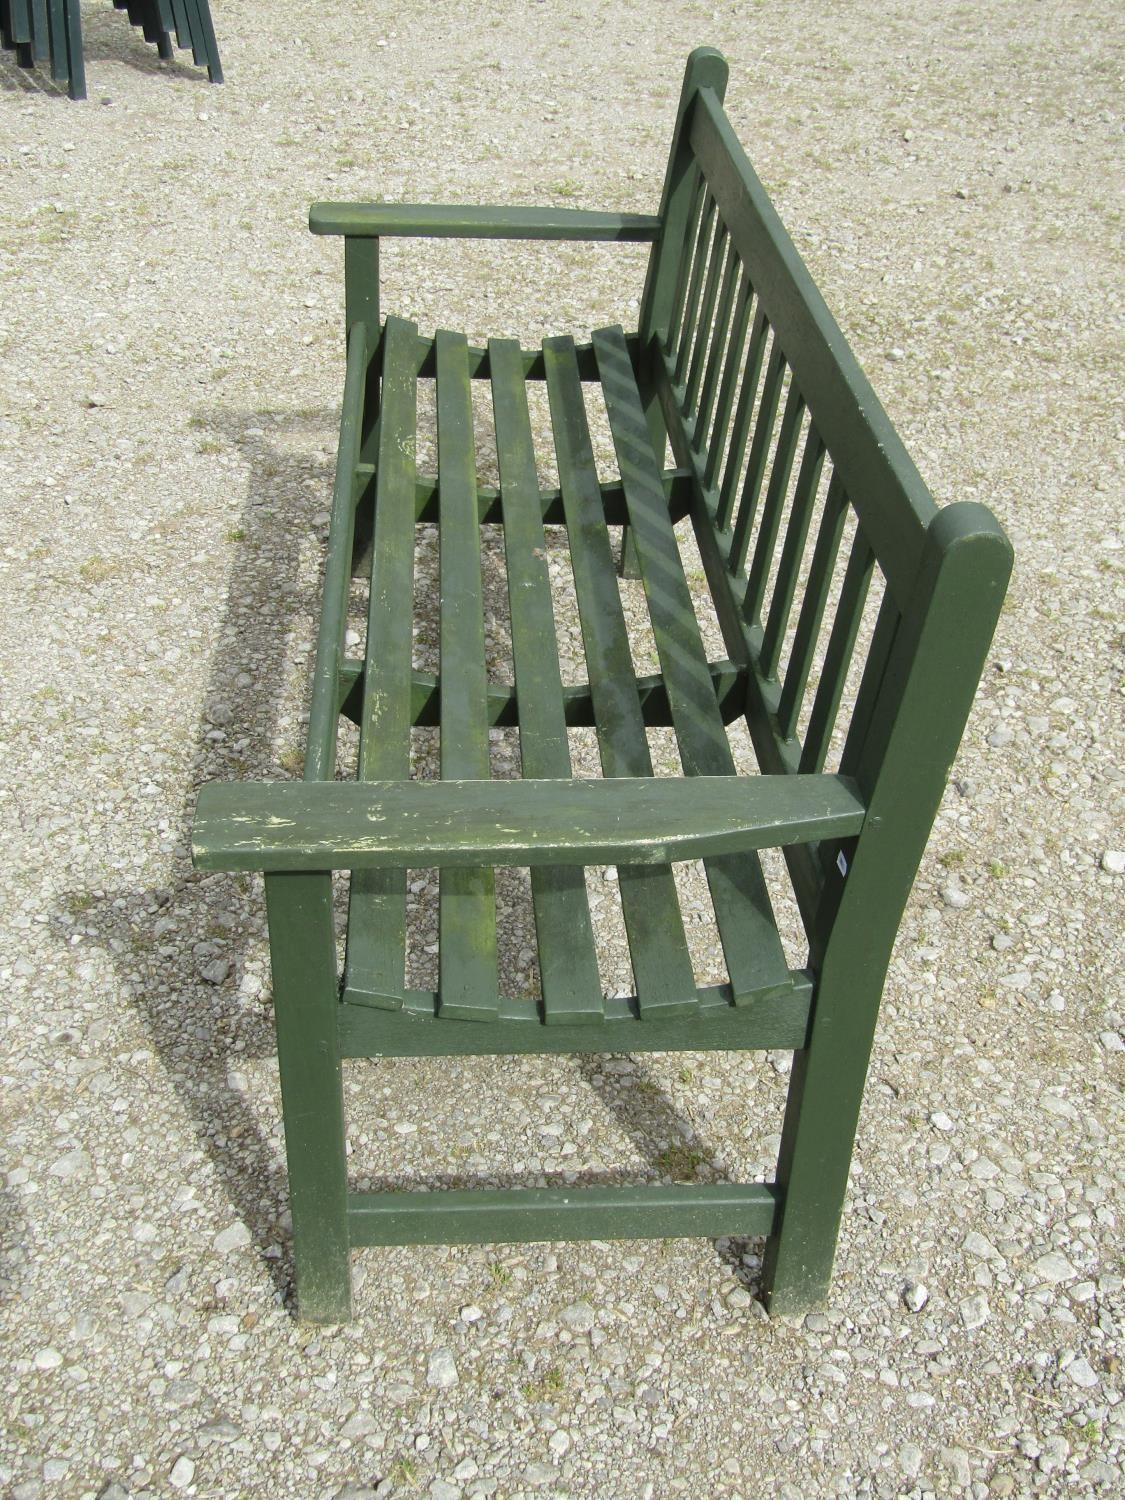 A vintage green painted teak three seat garden bench with slatted seat and back (probably a Lister - Image 2 of 5